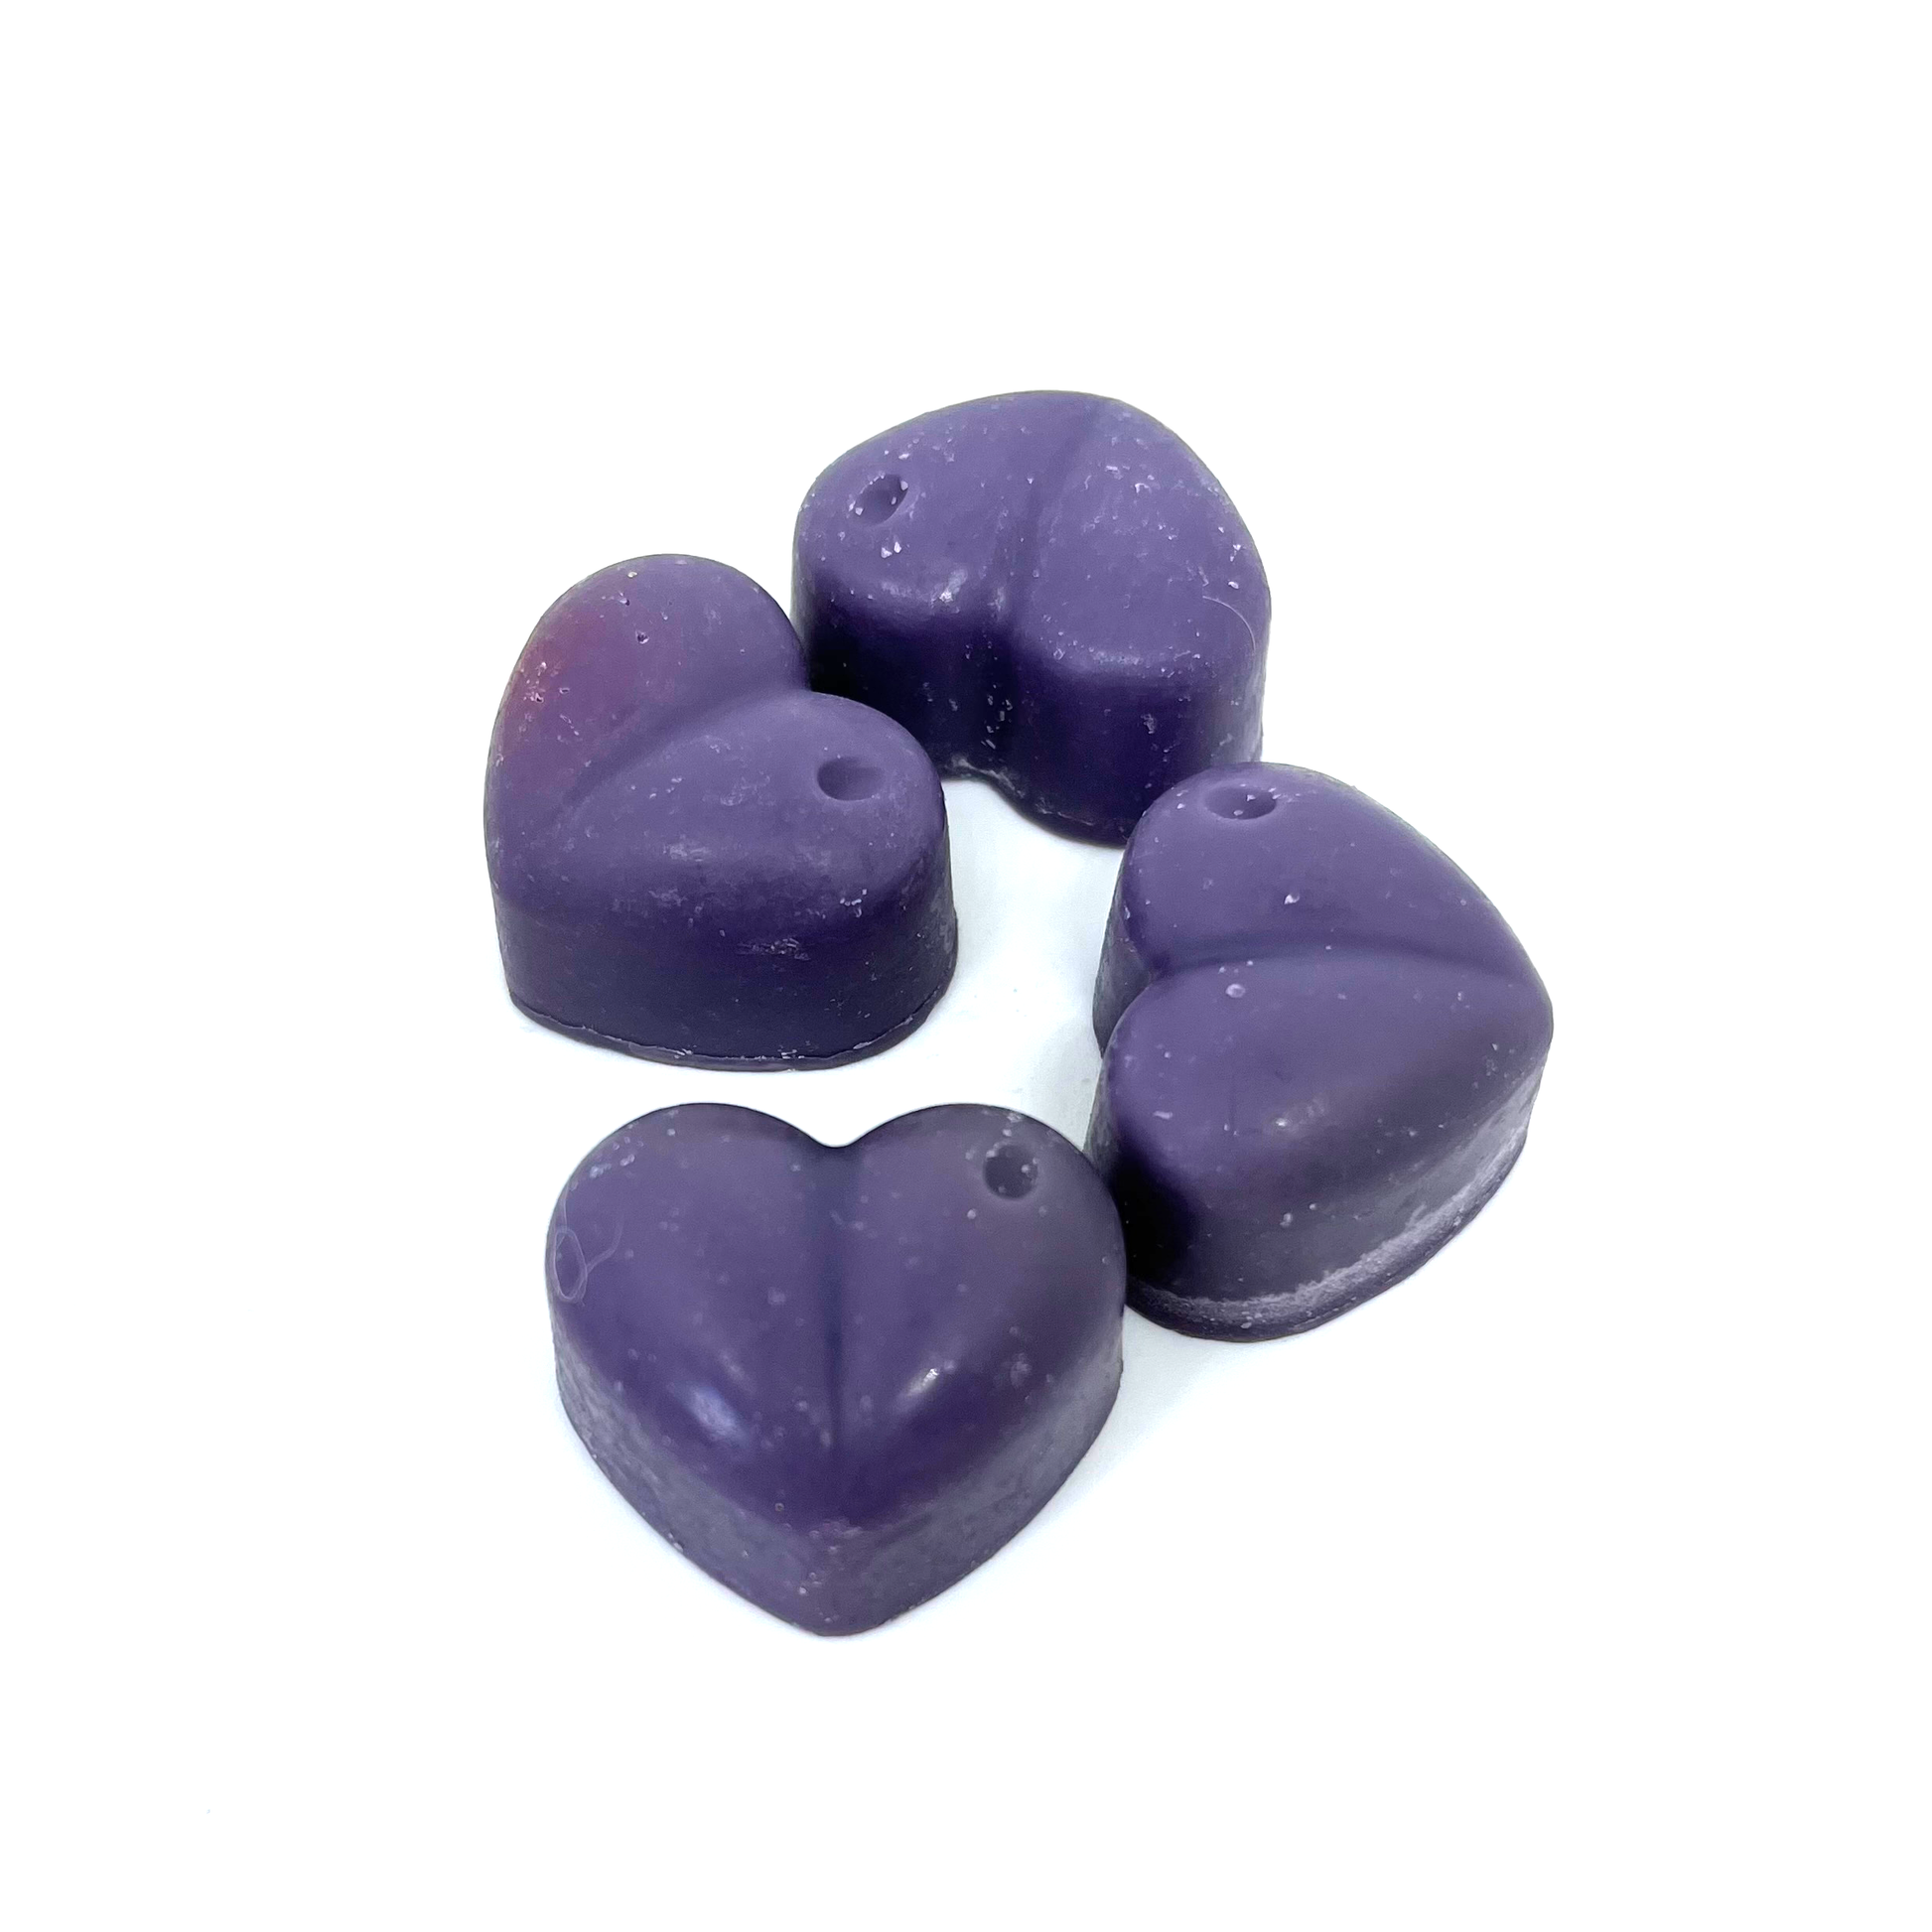 Velvet Orchid Wax Melts Inspired by TF - ScentiMelti  Velvet Orchid Wax Melts Inspired by TF